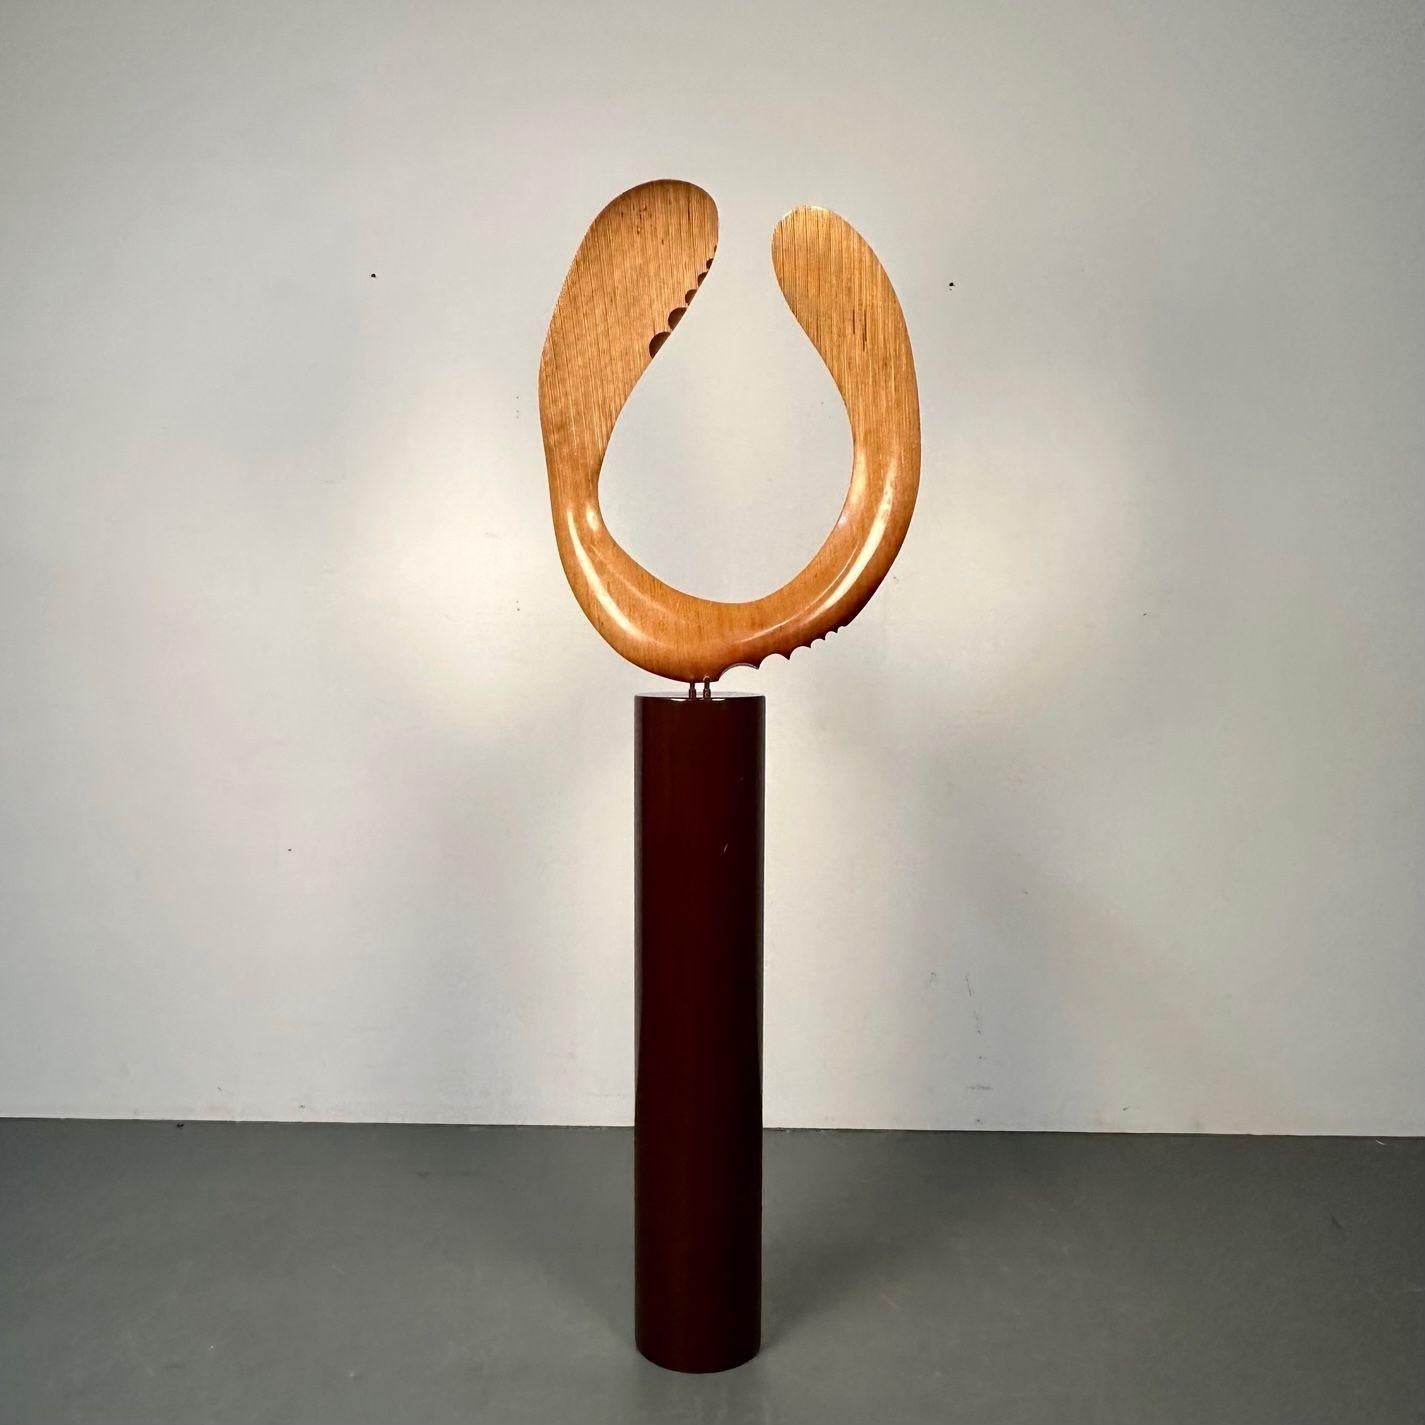 Modern Boomerang Wooden Sculpture on Steel Pedestal by David Hymes, Contemporary

A laminated plywood 'Boomerang' sculpture by David Hymes, mounted on a steel pedestal.

David Hymes has 30 years experience in creating fine furniture and sculpture,